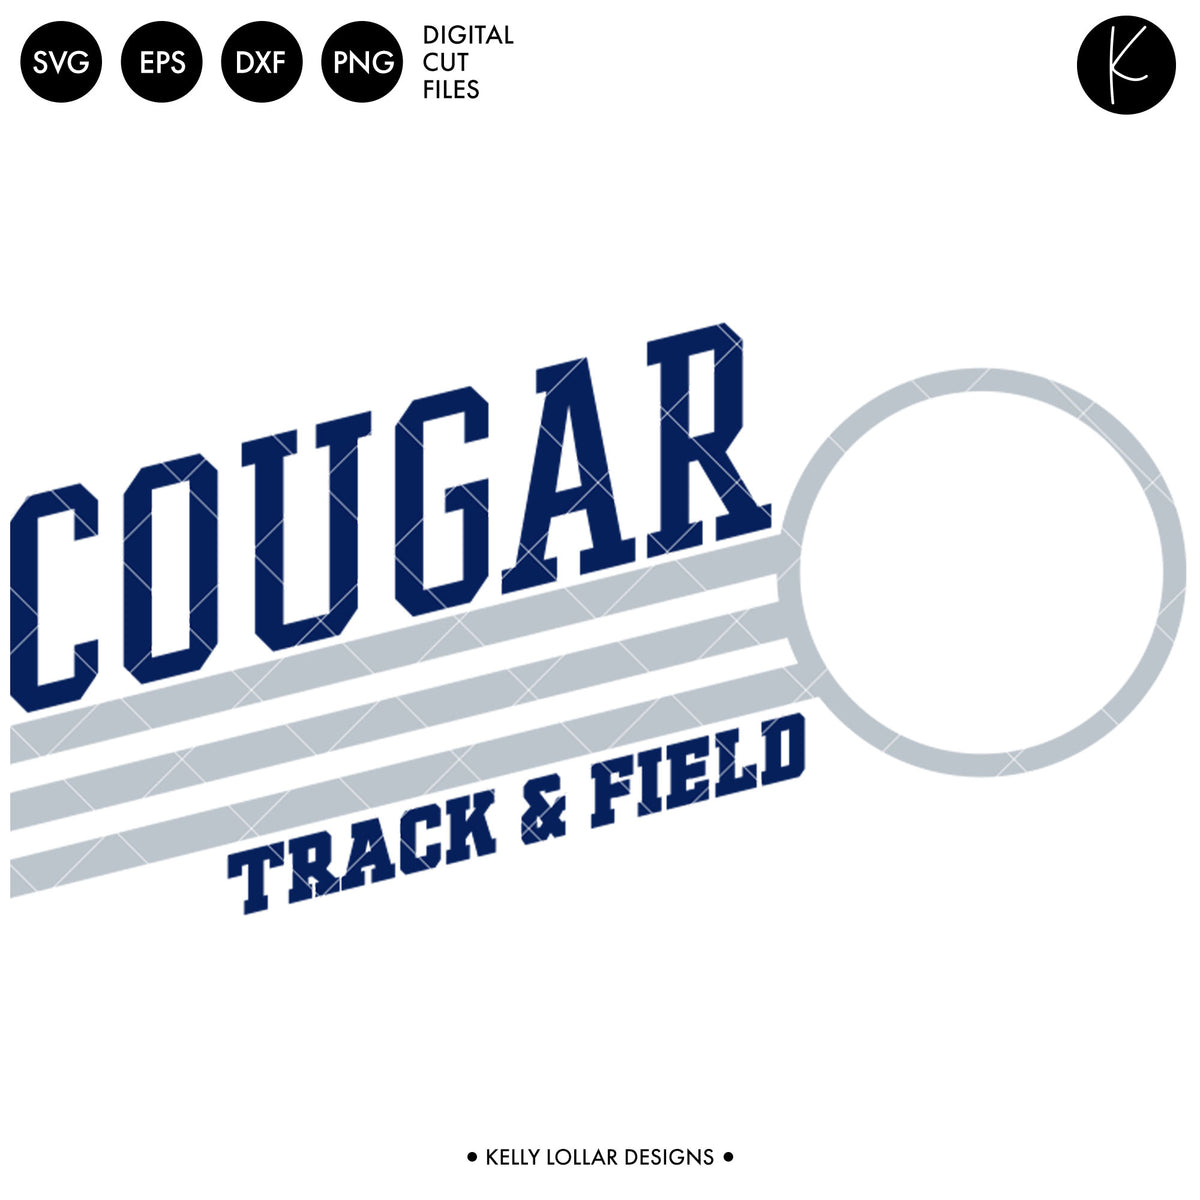 Cougars Track &amp; Field Bundle | SVG DXF EPS PNG Cut Files